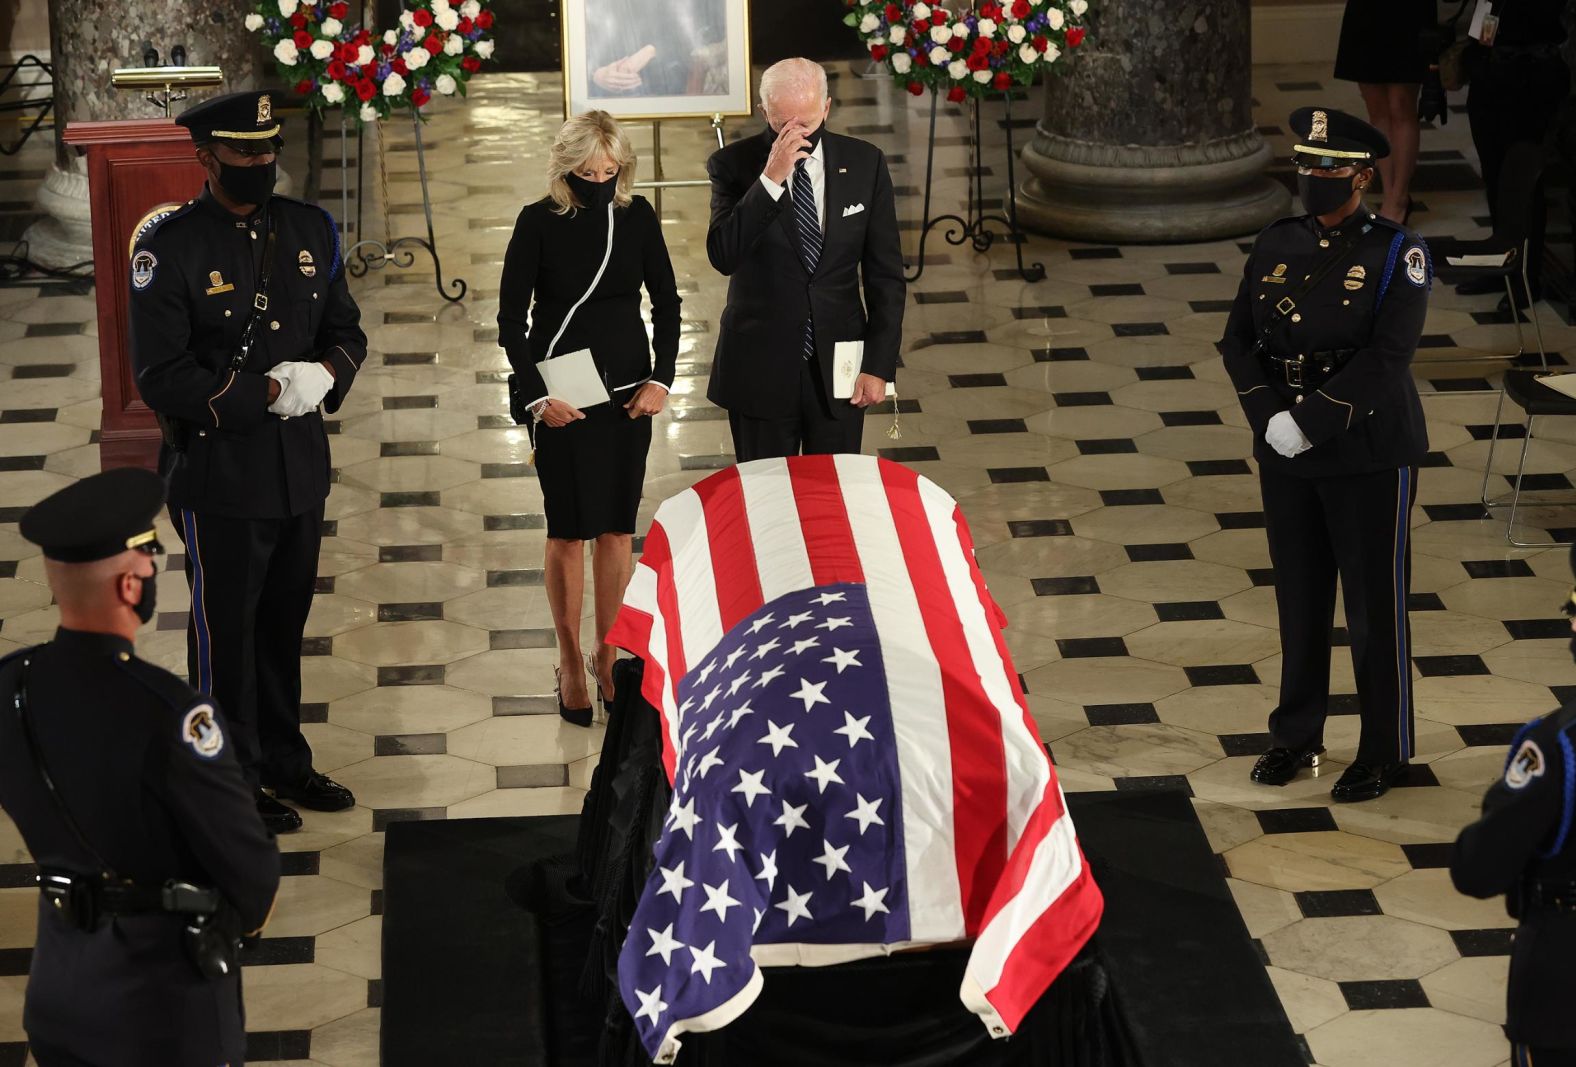 Democratic presidential nominee Joe Biden and his wife, Jill Biden, pay their respects during Friday's service.